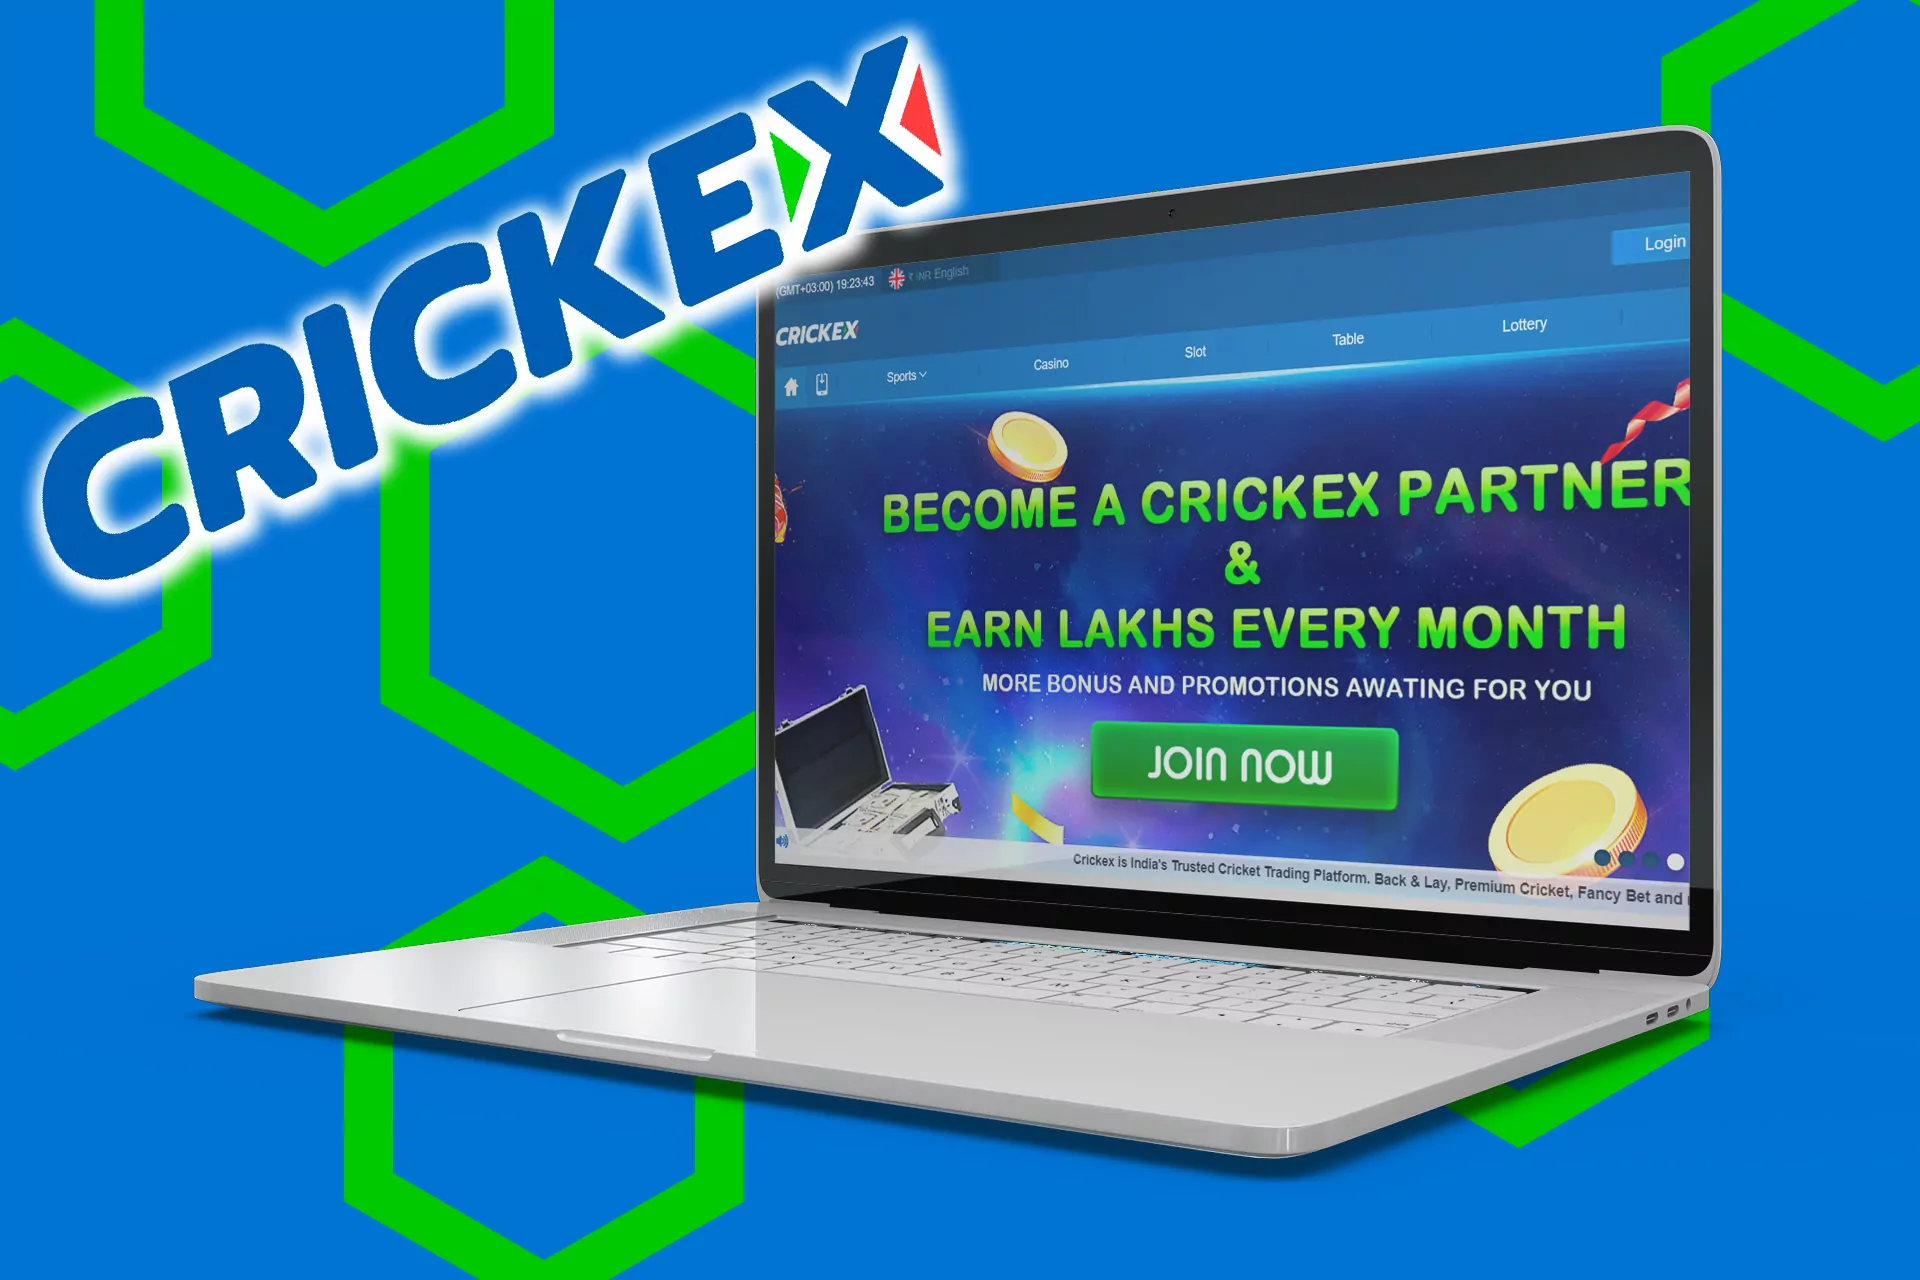 Crcikex bookie is a good choice for online betting, casino and lotteries in Bangladesh.